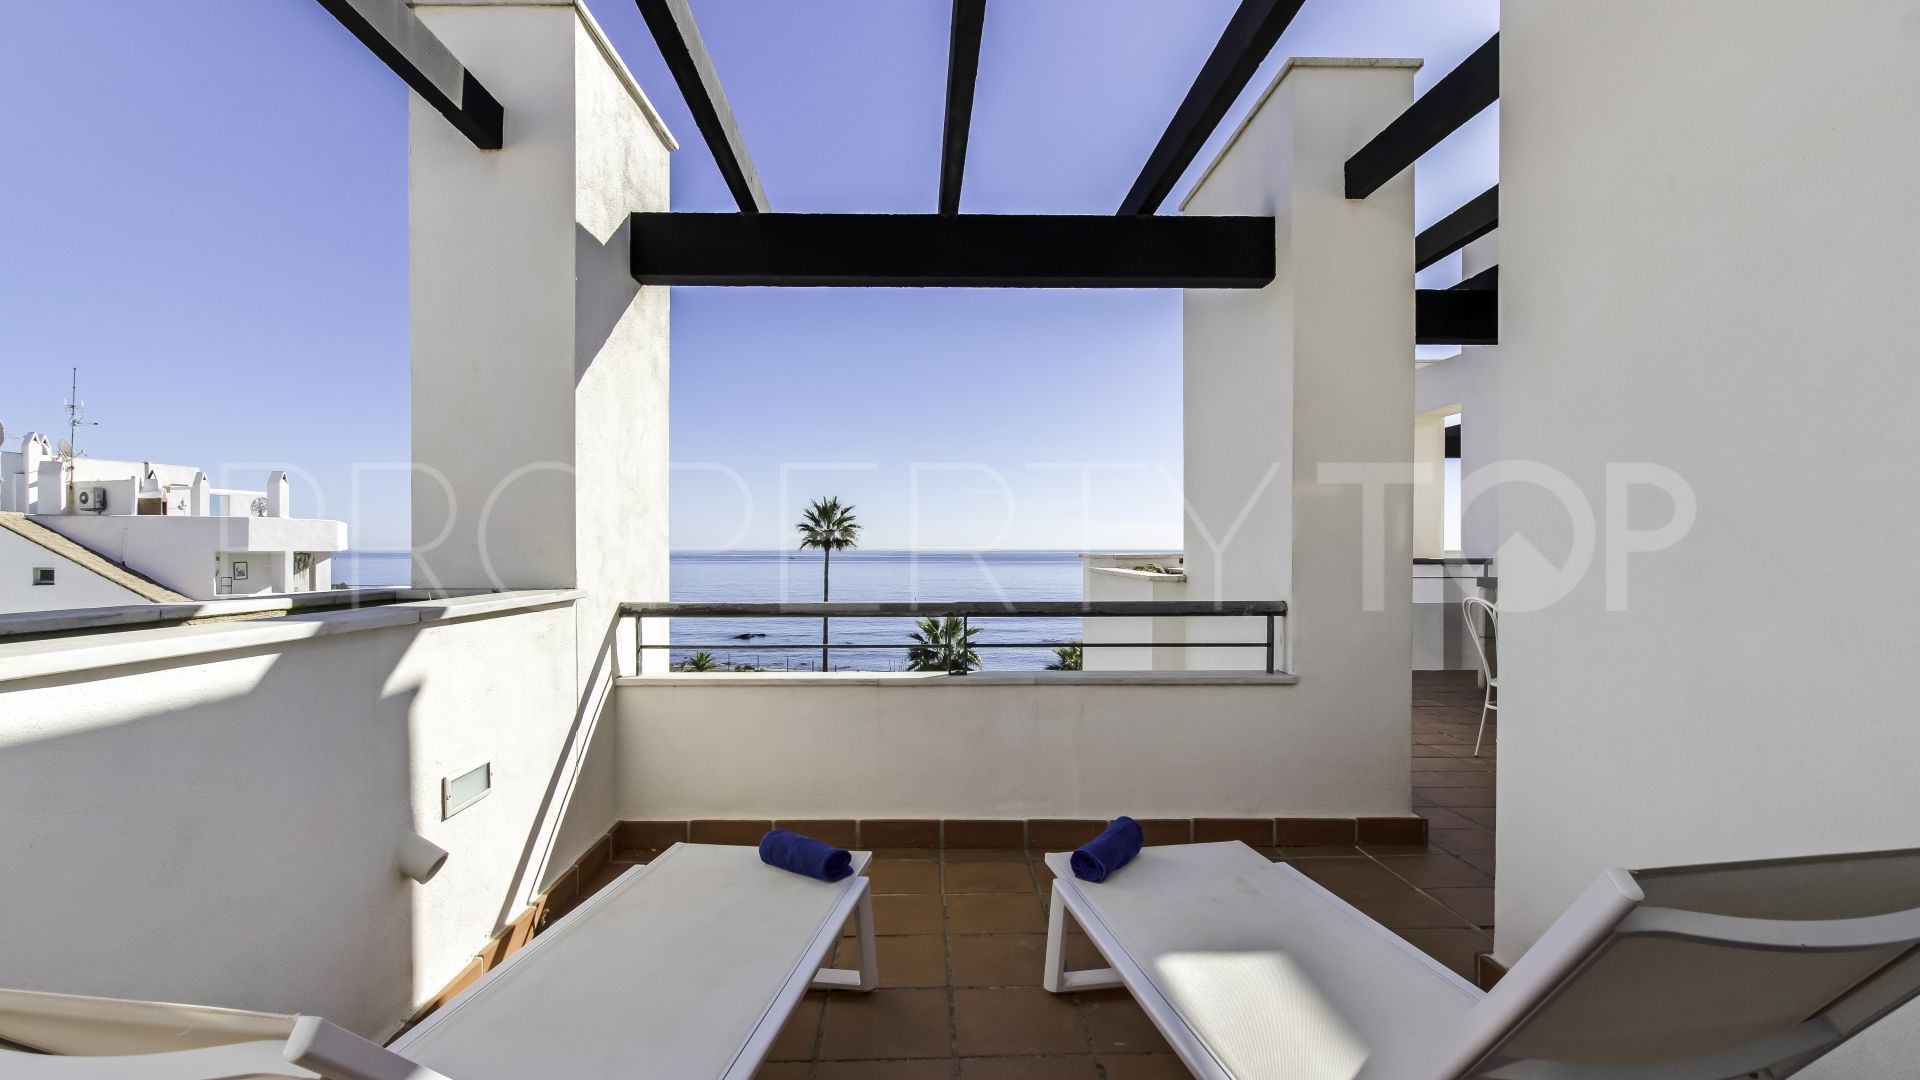 Penthouse with 2 bedrooms for sale in Casares del Mar